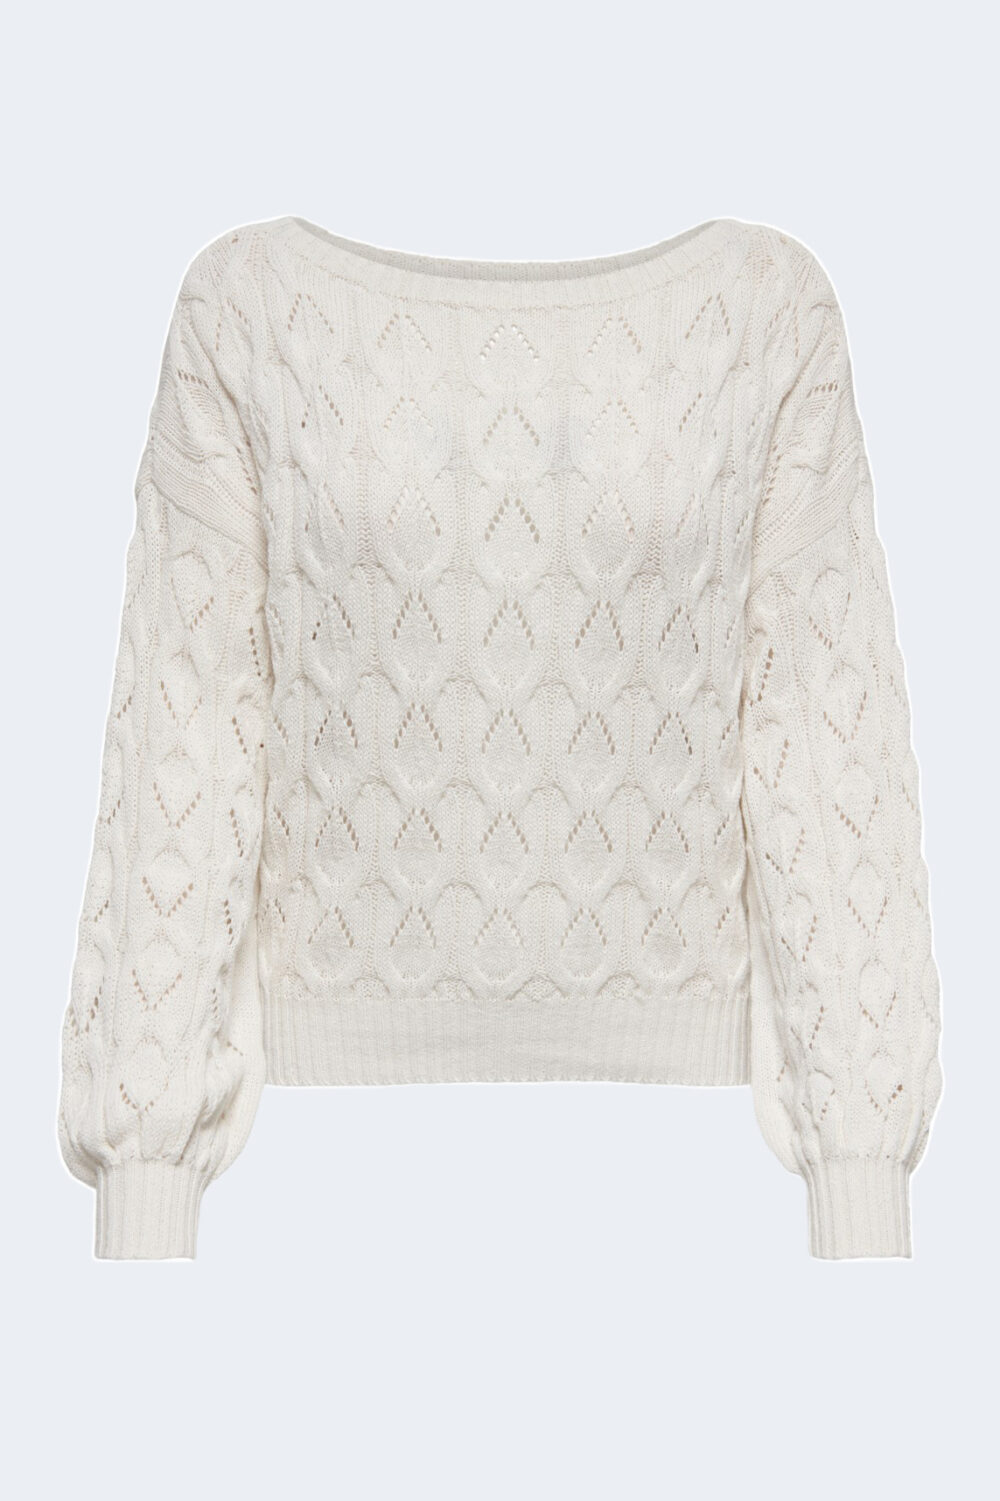 Maglione Only BRYNN LIFE STRUCTURE L/S PUL KNT NOOS Bianco - Foto 4